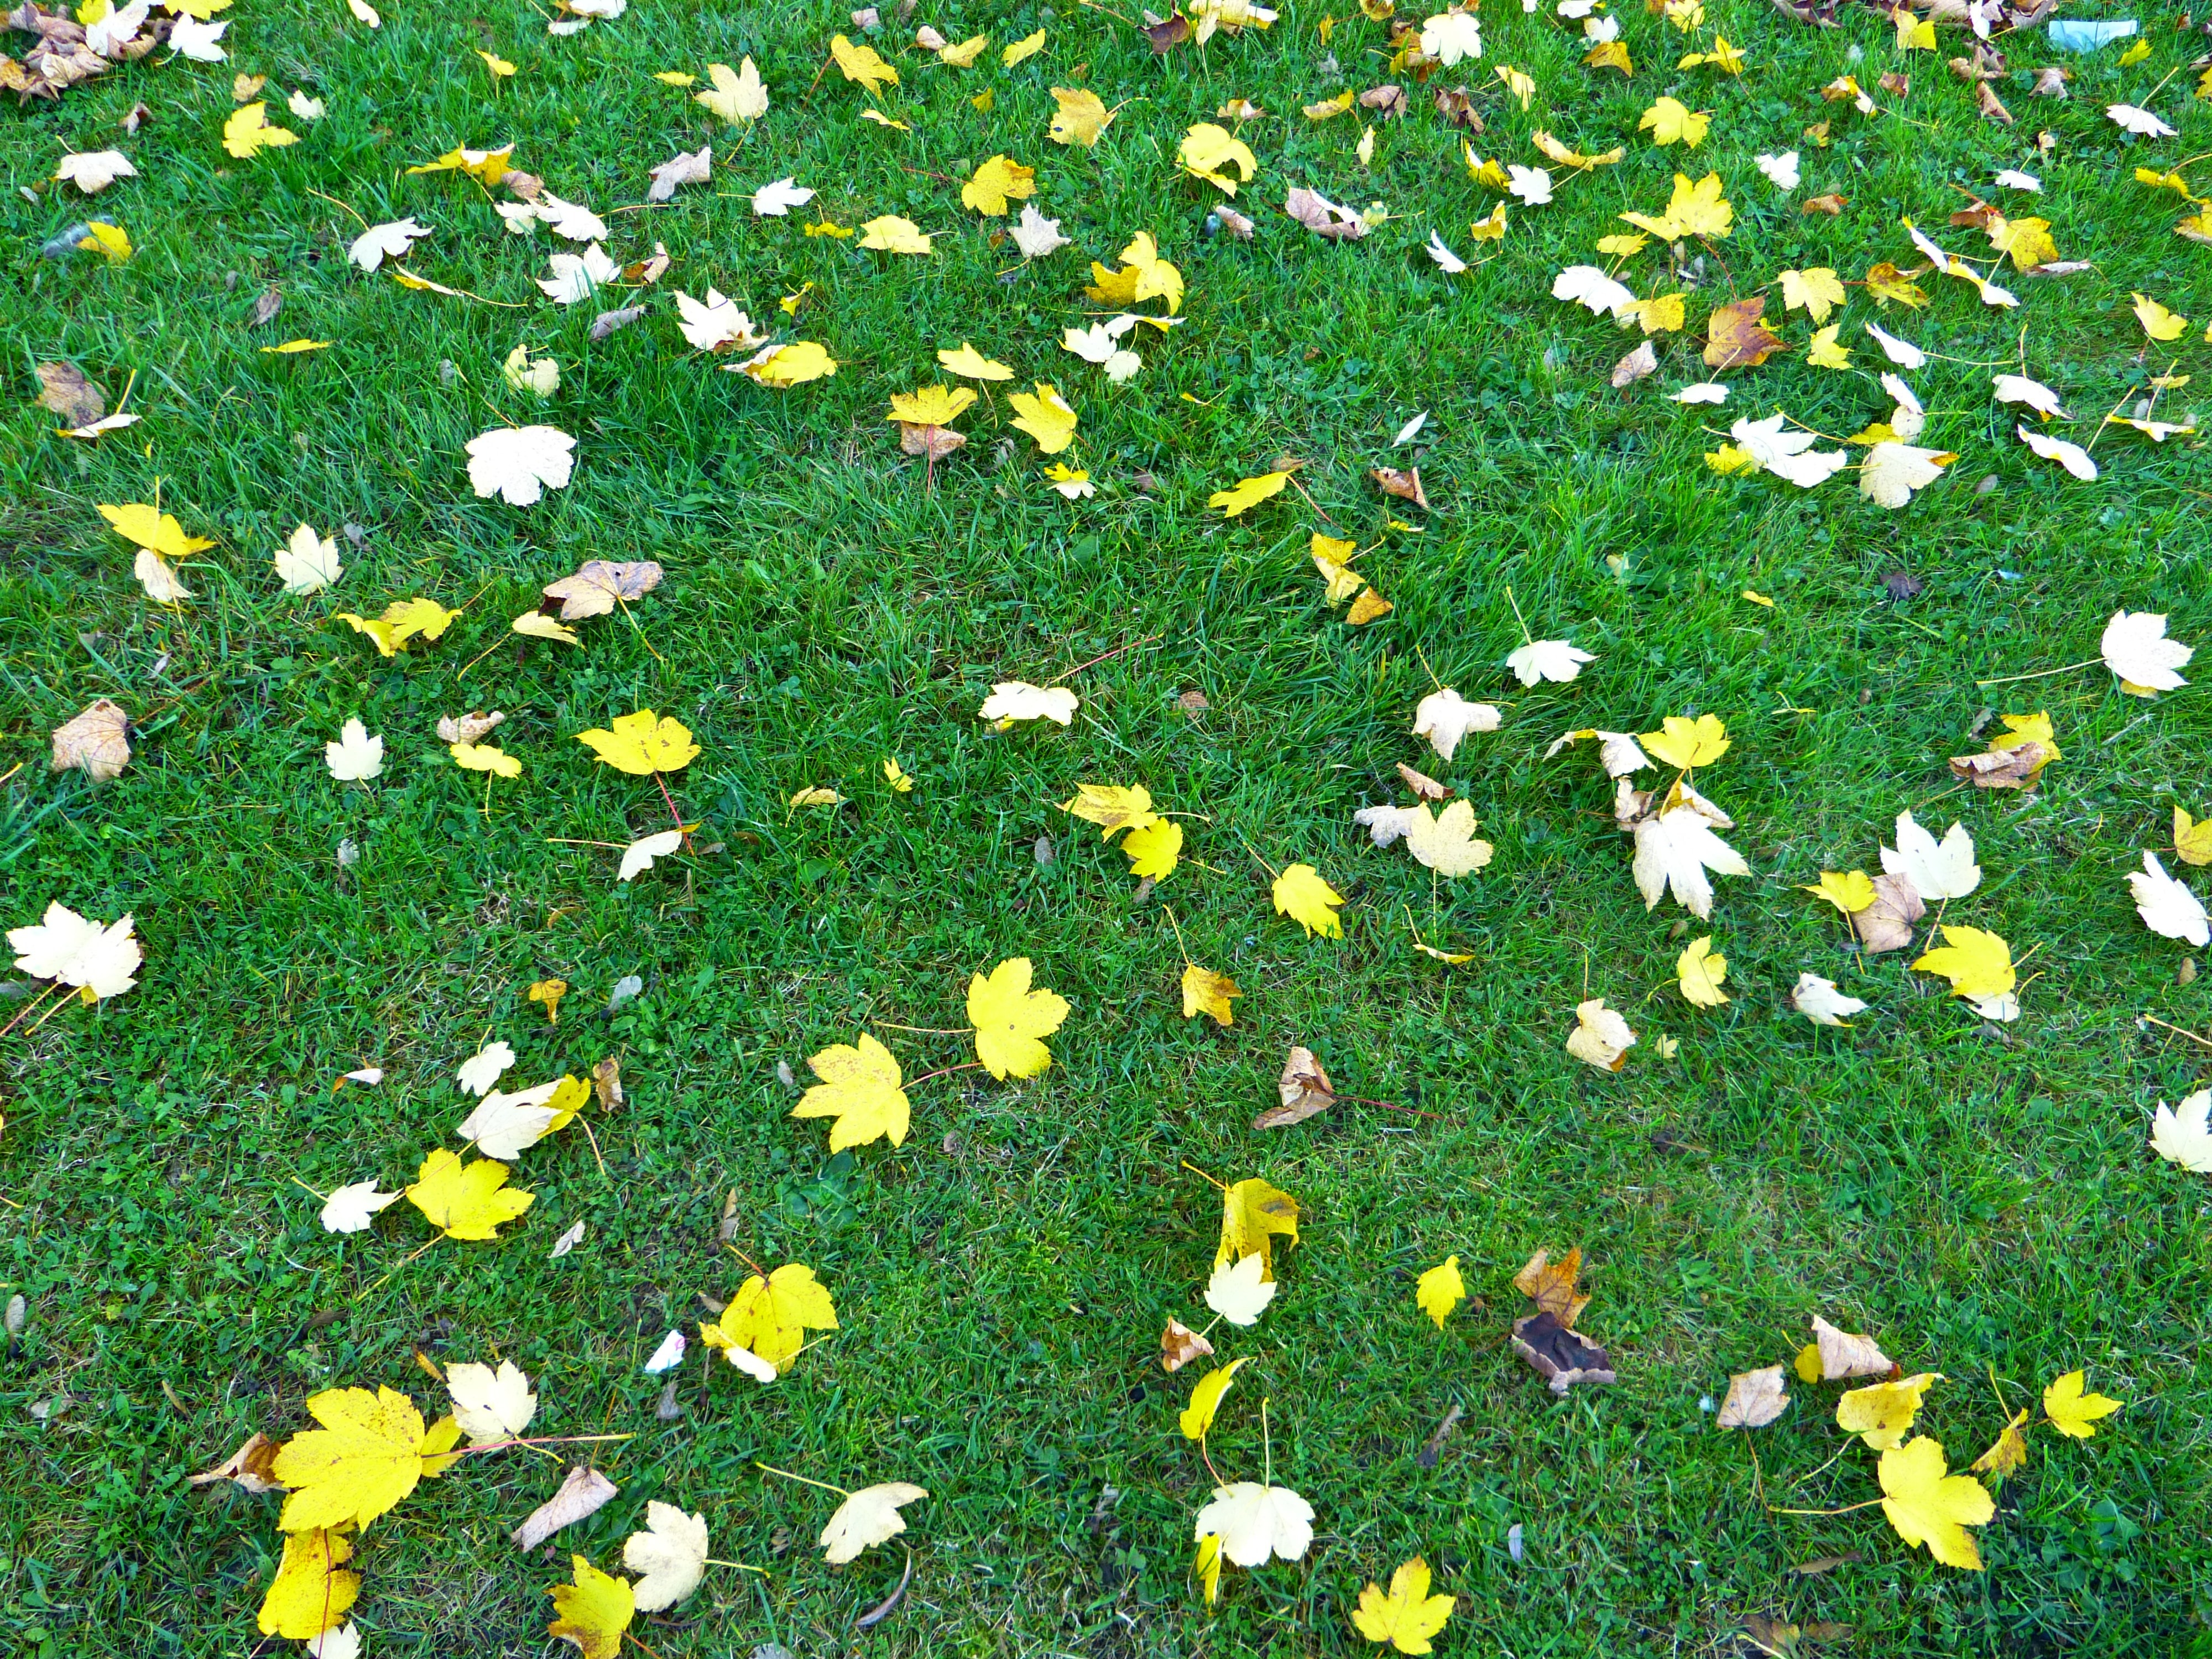 yellow, white, and brown fallen leaves on green grass